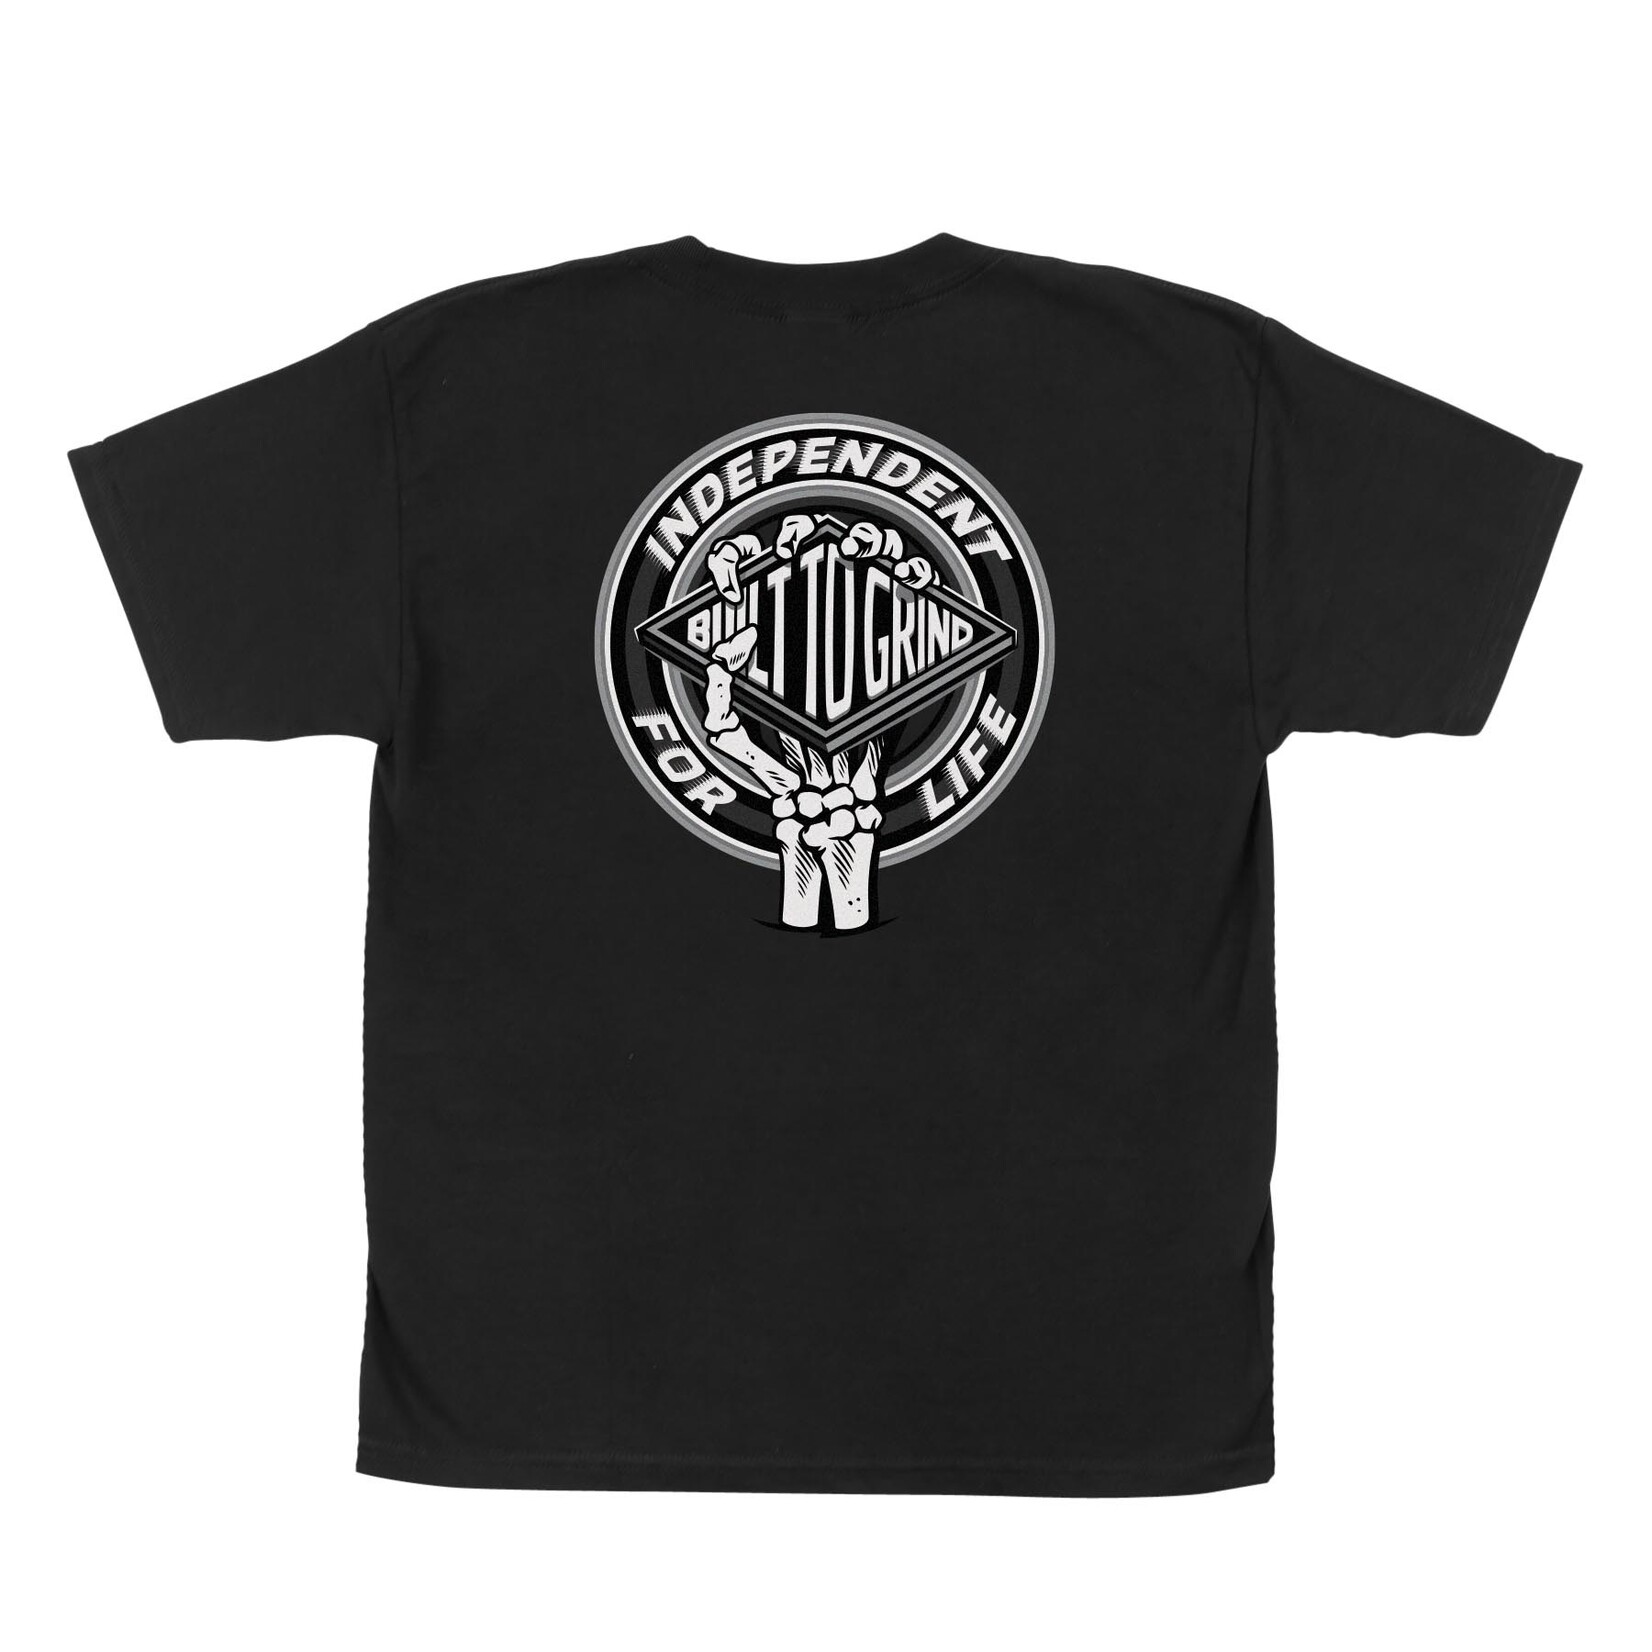 Independent Independent For Life Clutch Youth S/S T-Shirt - Black - S